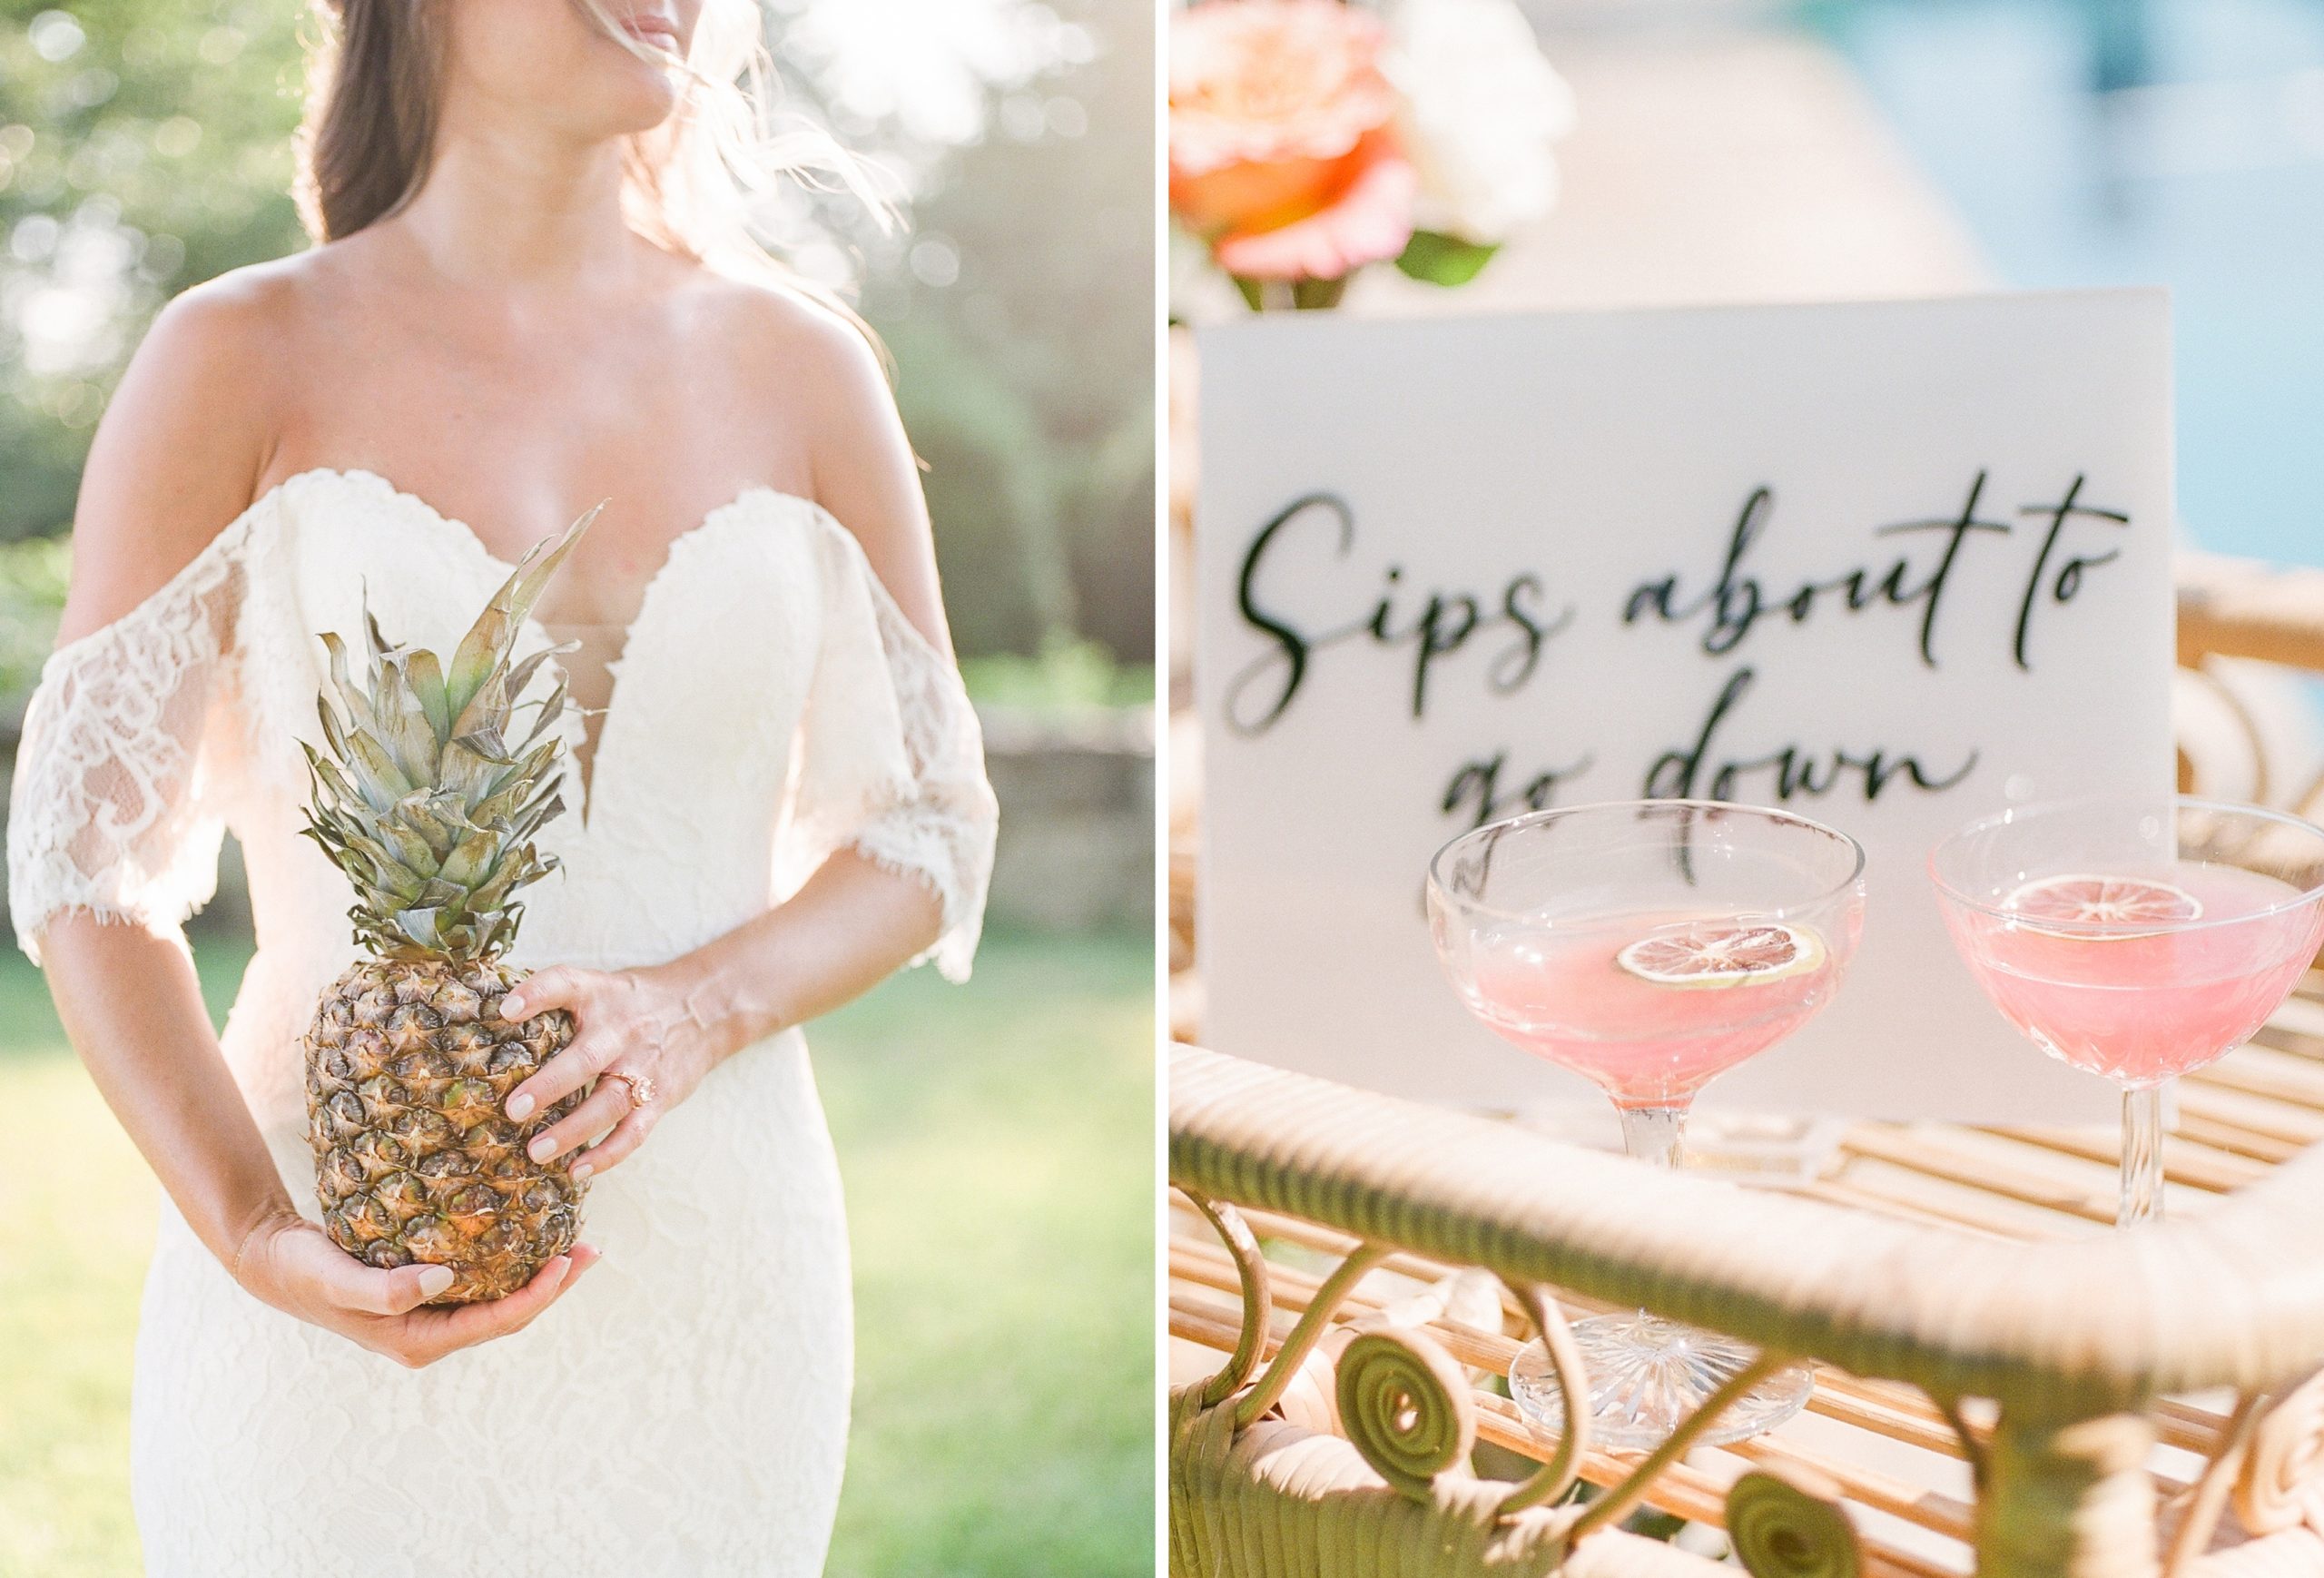 A chic and fun Palm Springs inspired wedding. Designed by SRS Events and photographed by DC wedding photographer, Alicia Lacey.